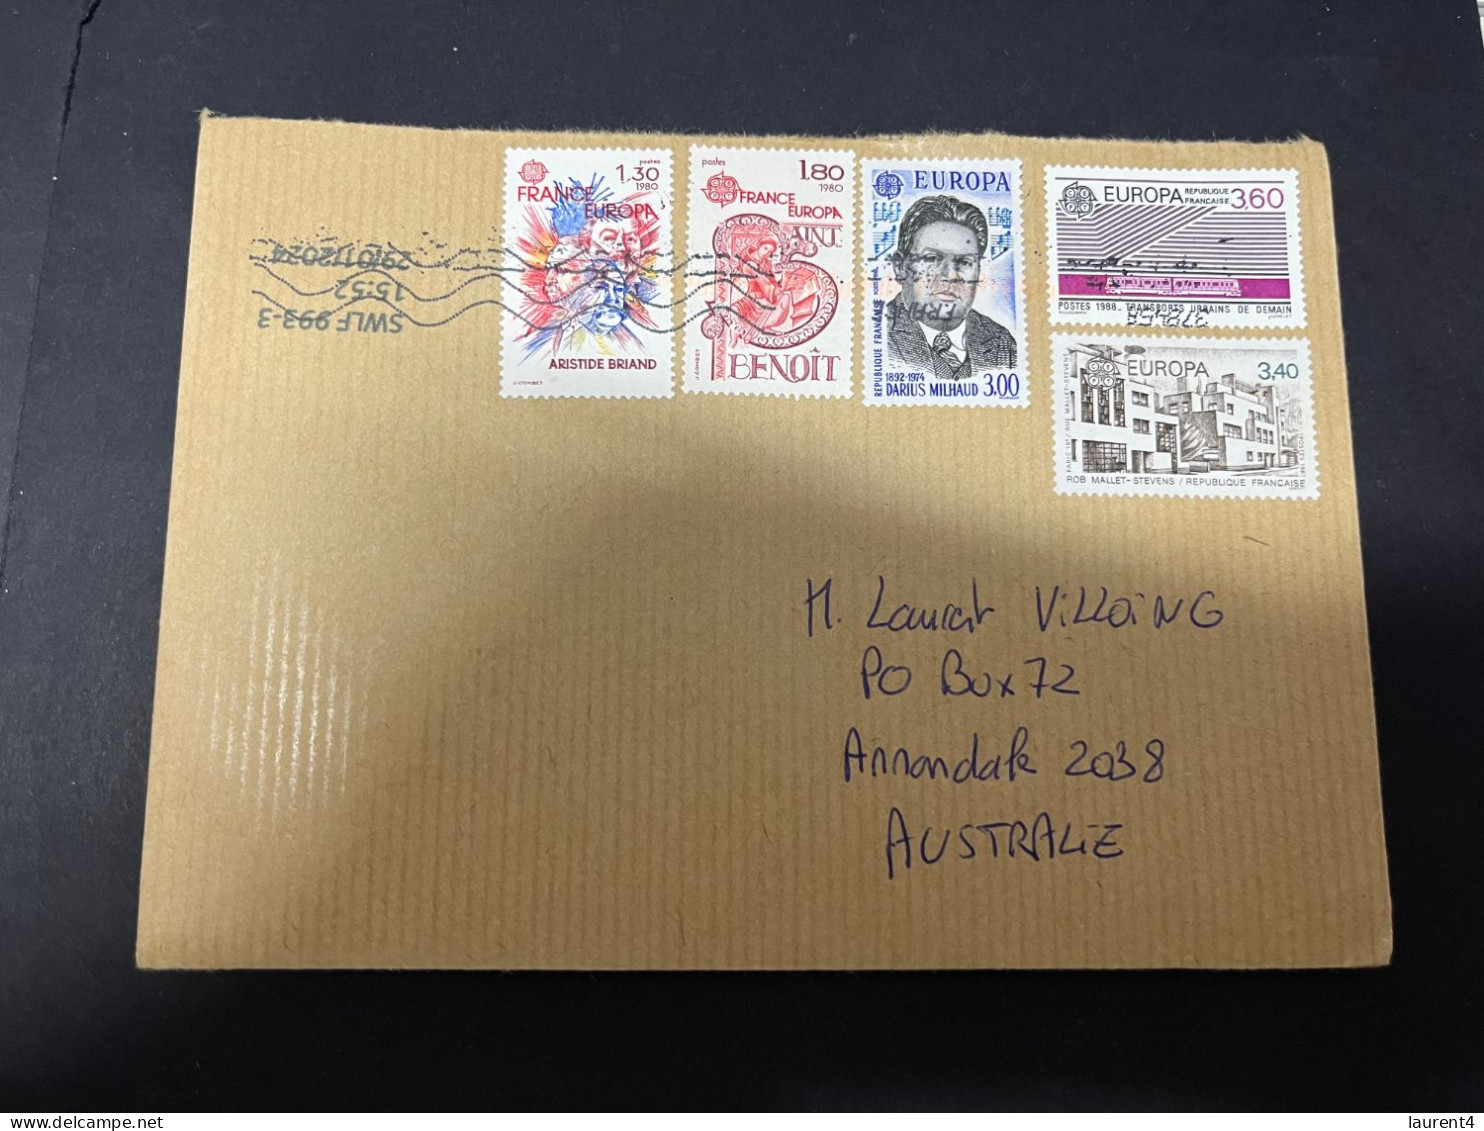 30-4-2023 (3 Z 27) Letter Posted From France To Australia In 2024 (2 Covers)  23 X 17 Cm + 1 Many EUROPA Stamps - Covers & Documents